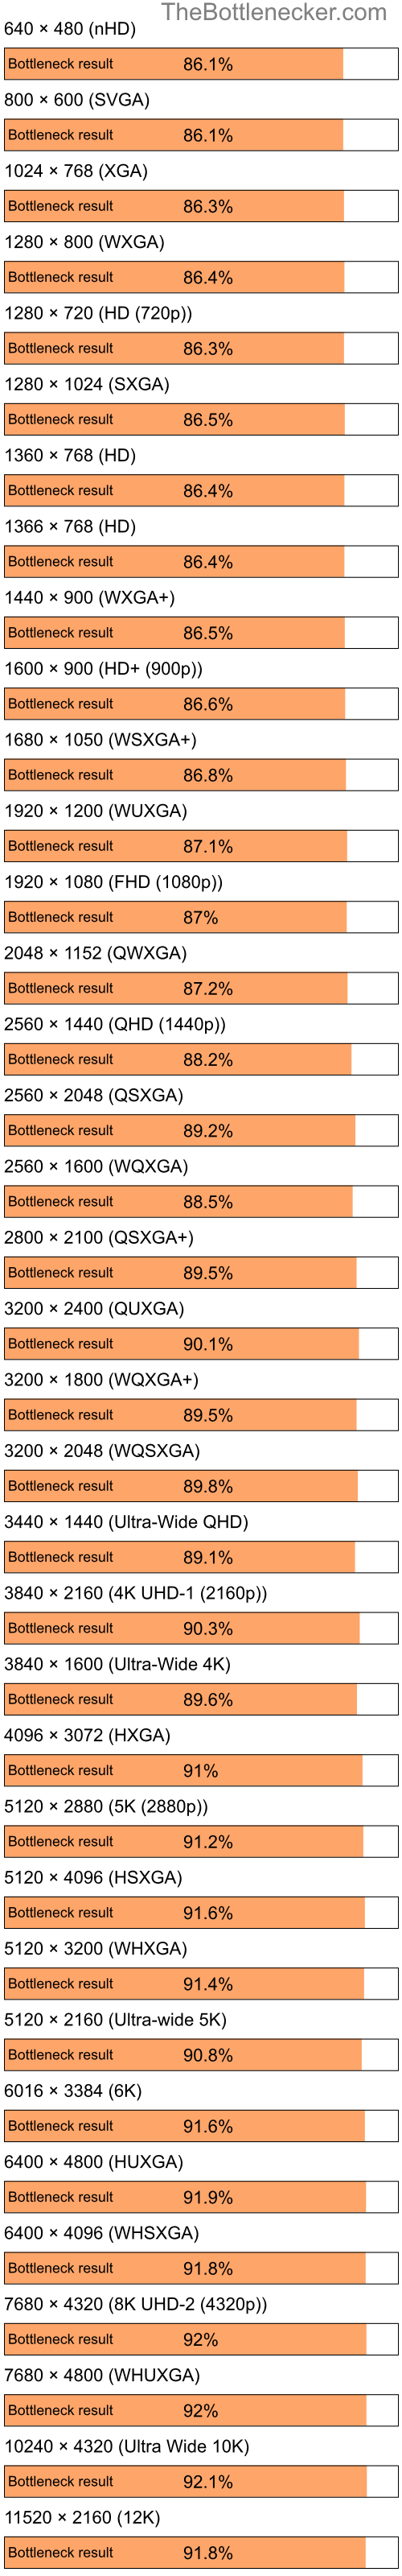 Bottleneck results by resolution for Intel Atom N270 and NVIDIA GeForce4 Ti 4200 in Processor Intense Tasks